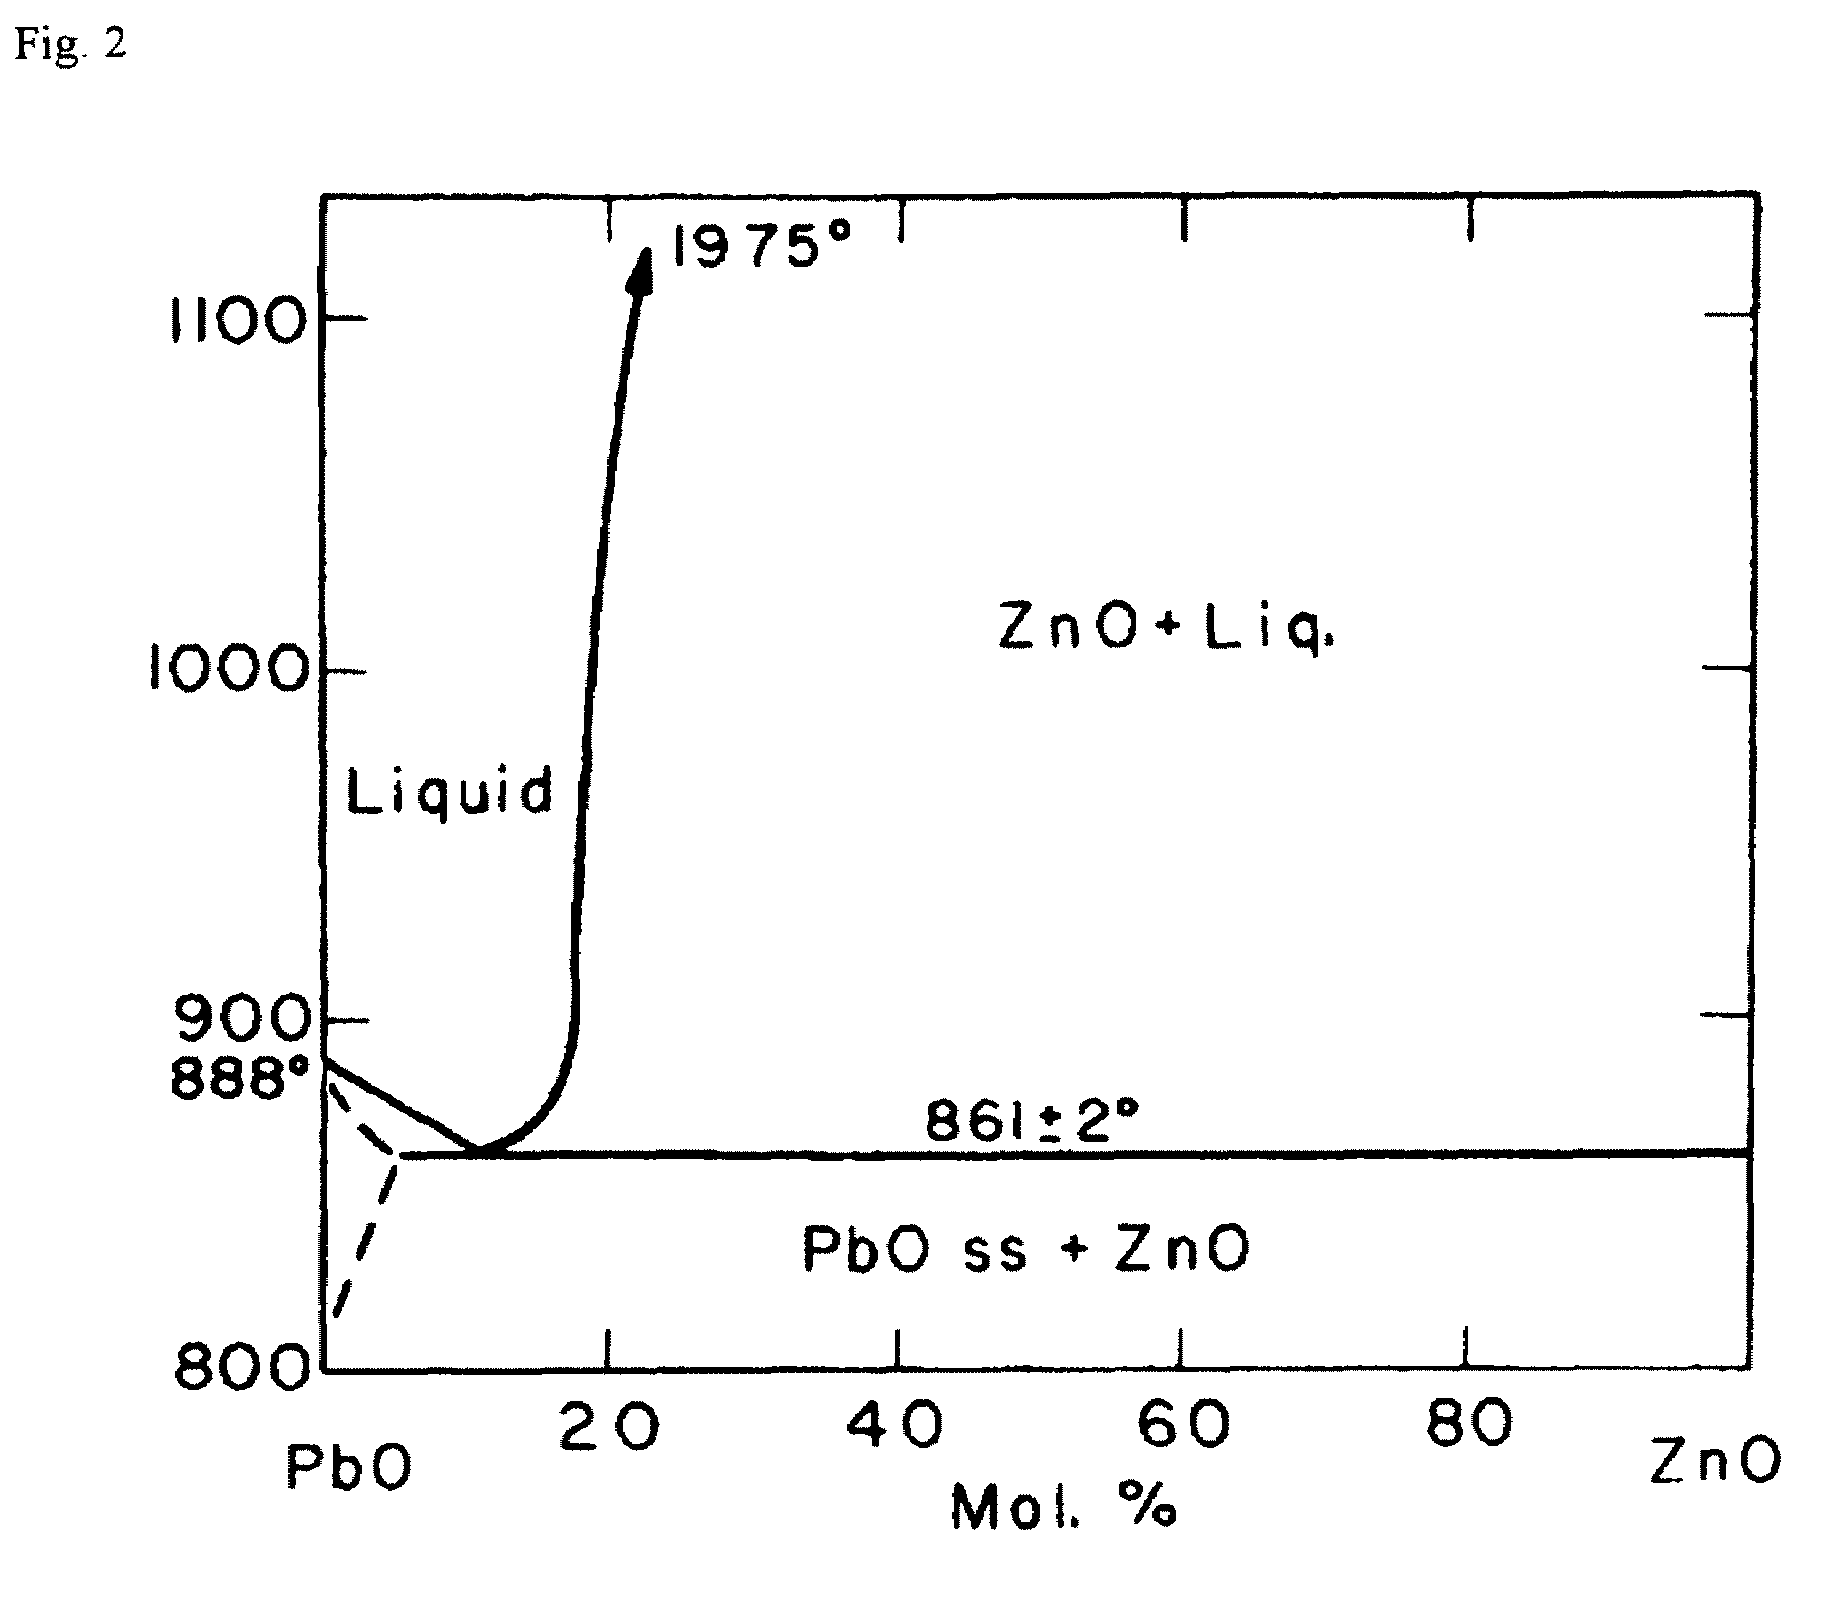 Process for producing ZnO single crystal according to method of liquid phase growth